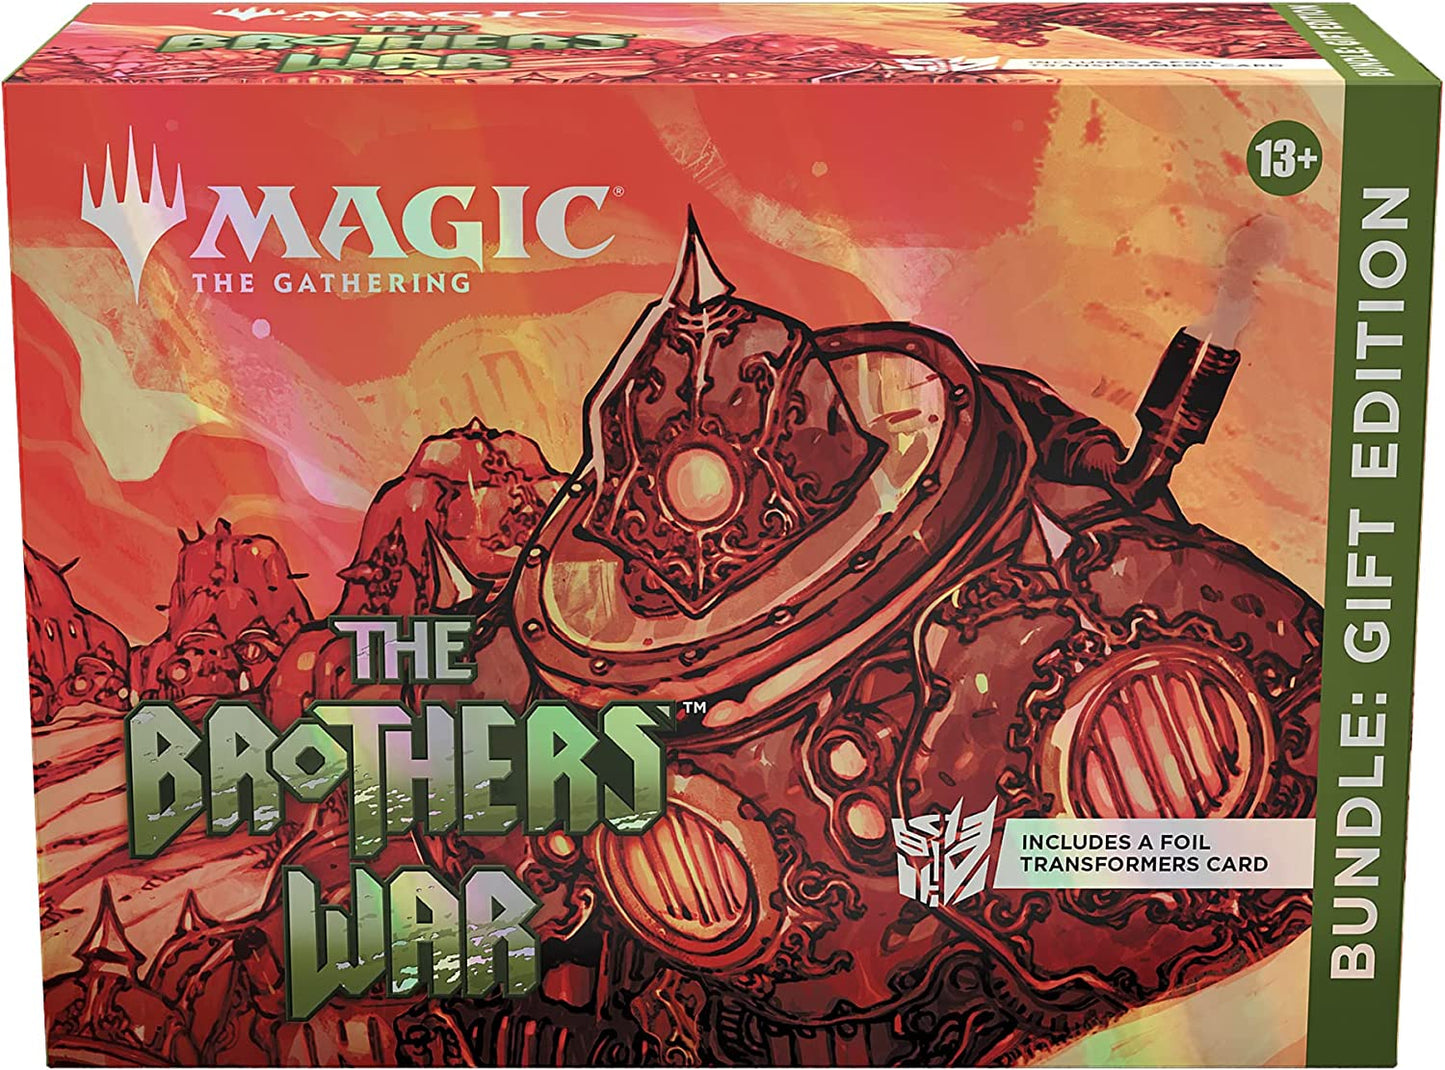 Magic: The Gathering Gift Bundle Case - The Brothers' War (Case of 6)